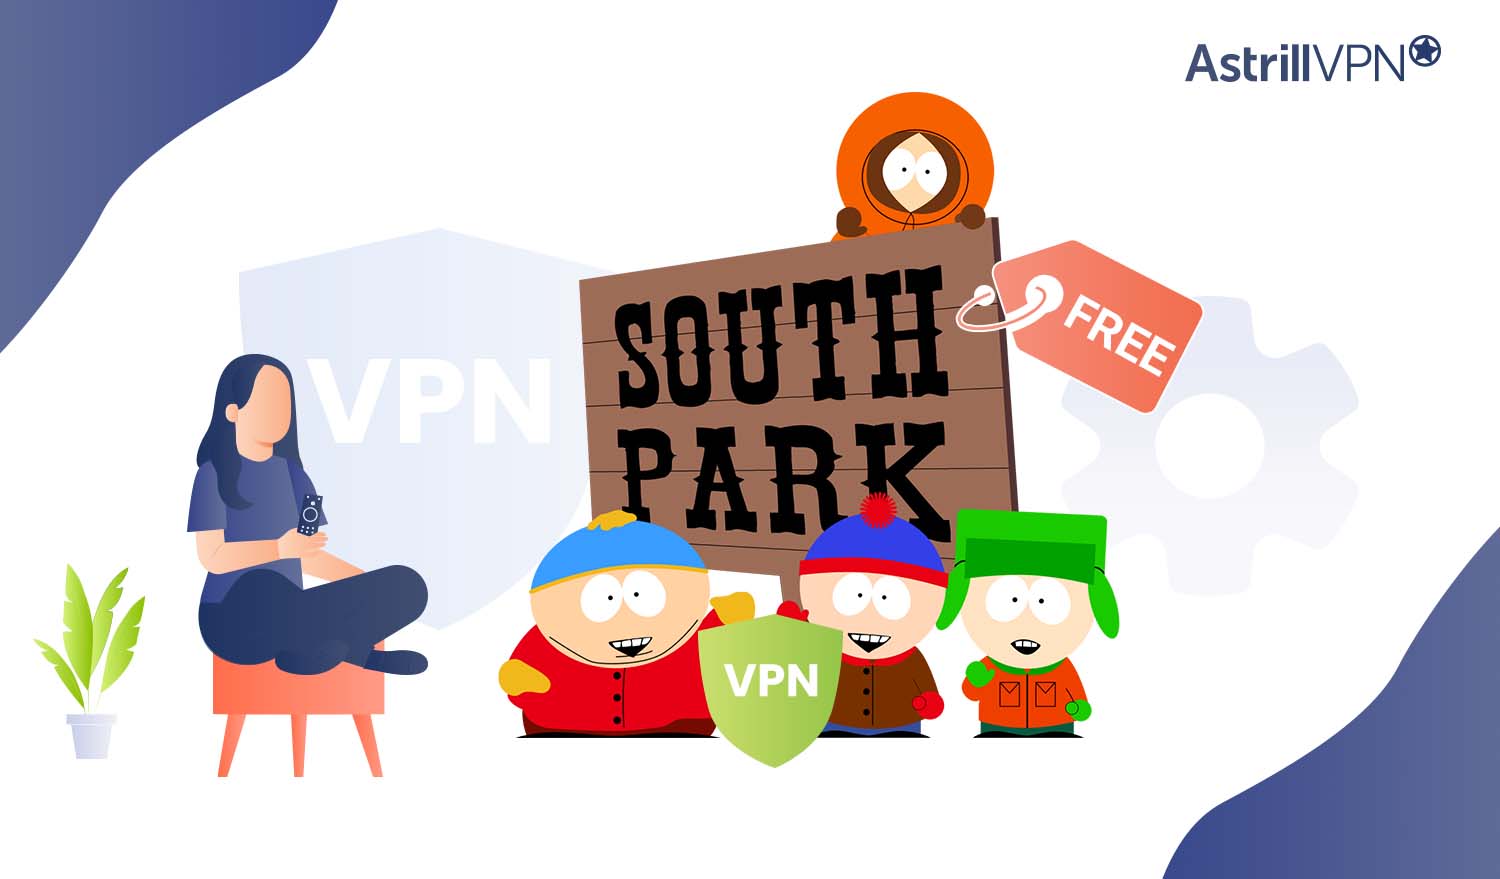 How to watch South Park free with a VPN